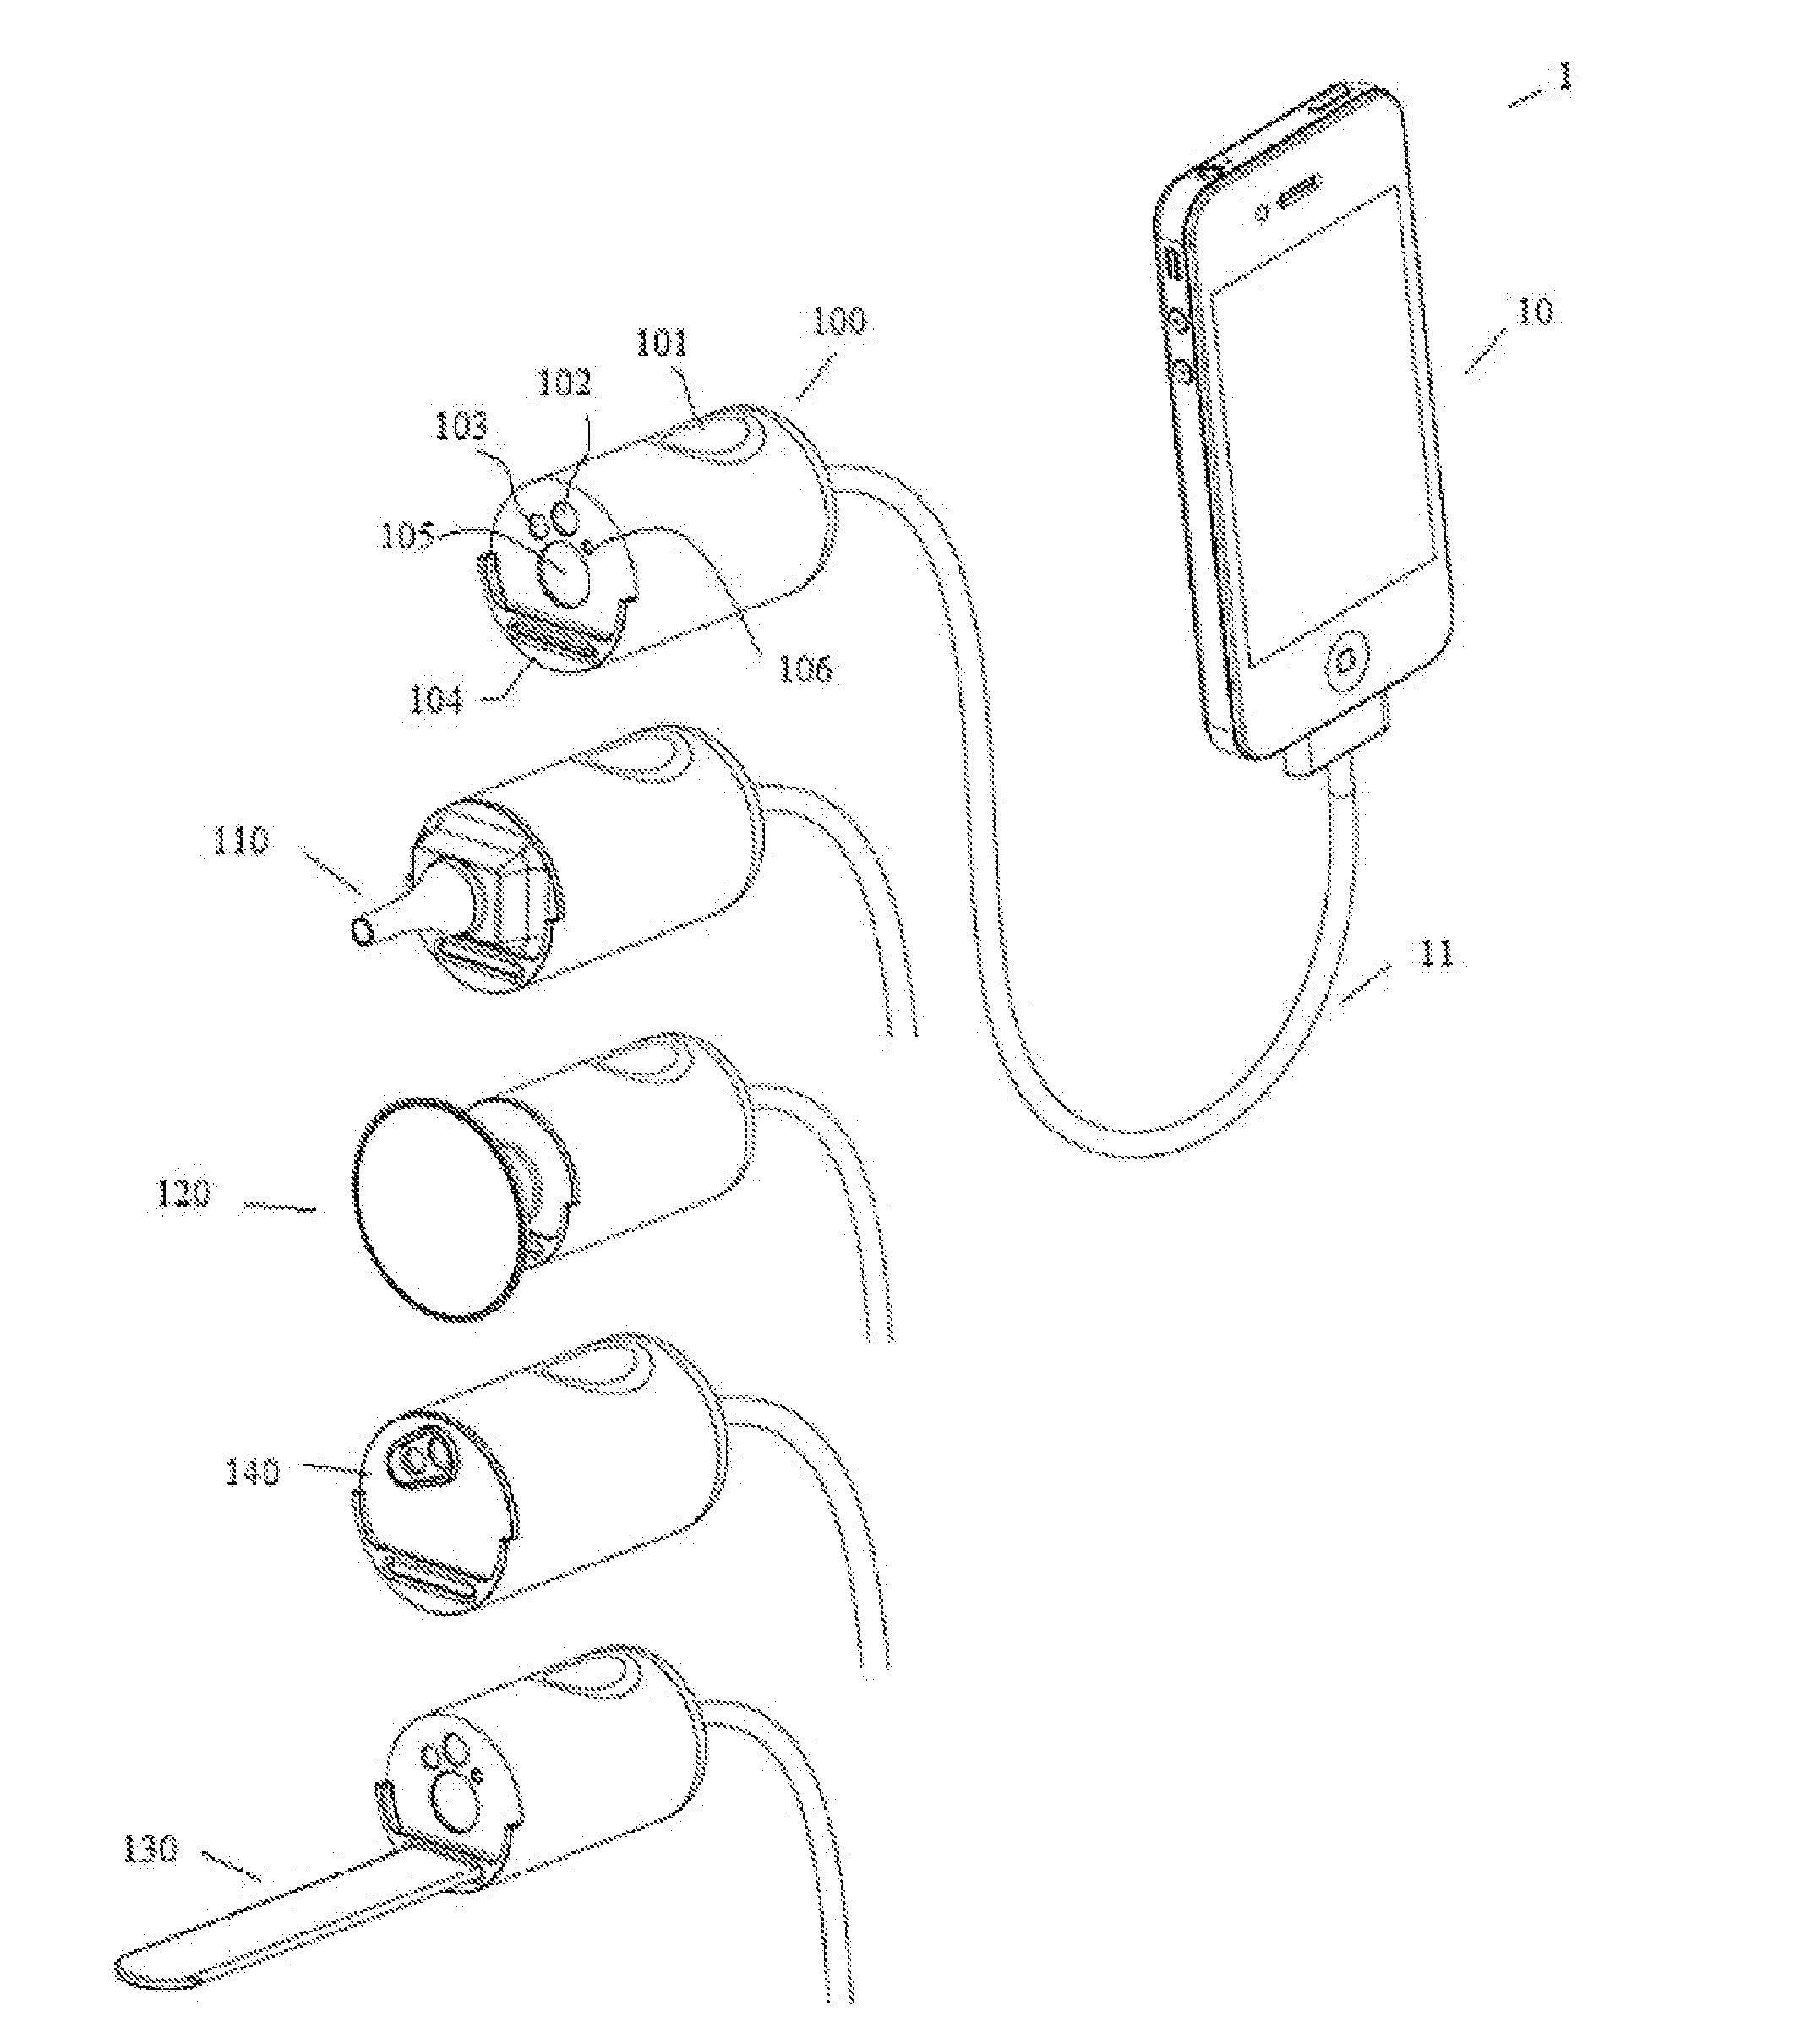 System and Method for Facilitating Remote Medical Diagnosis and Consultation